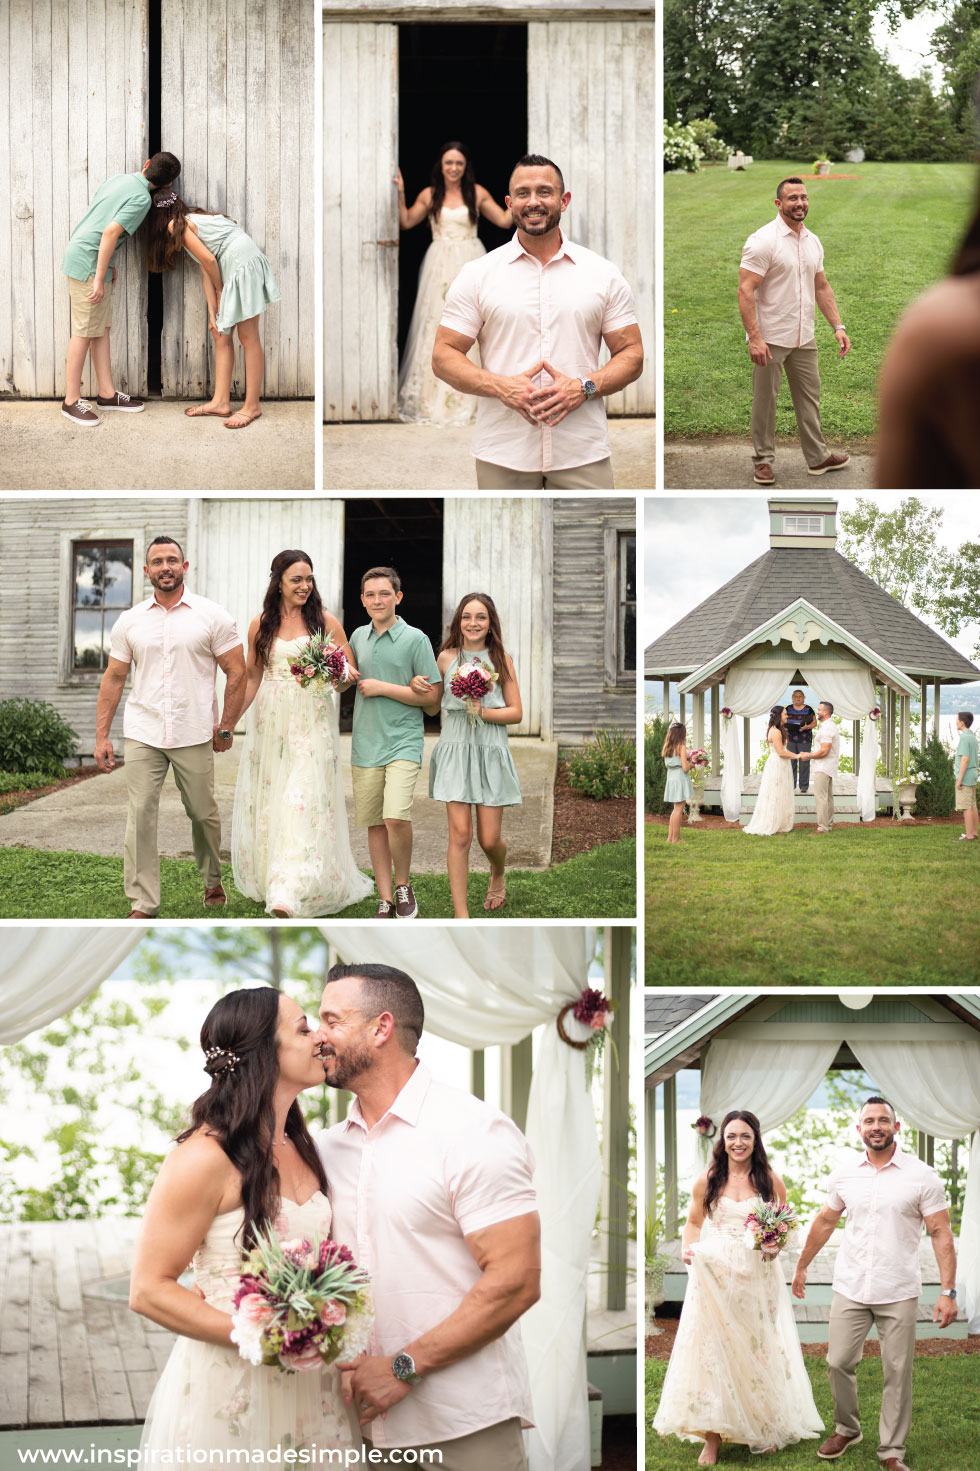 Vermont Wedding at An Affair by the Lake